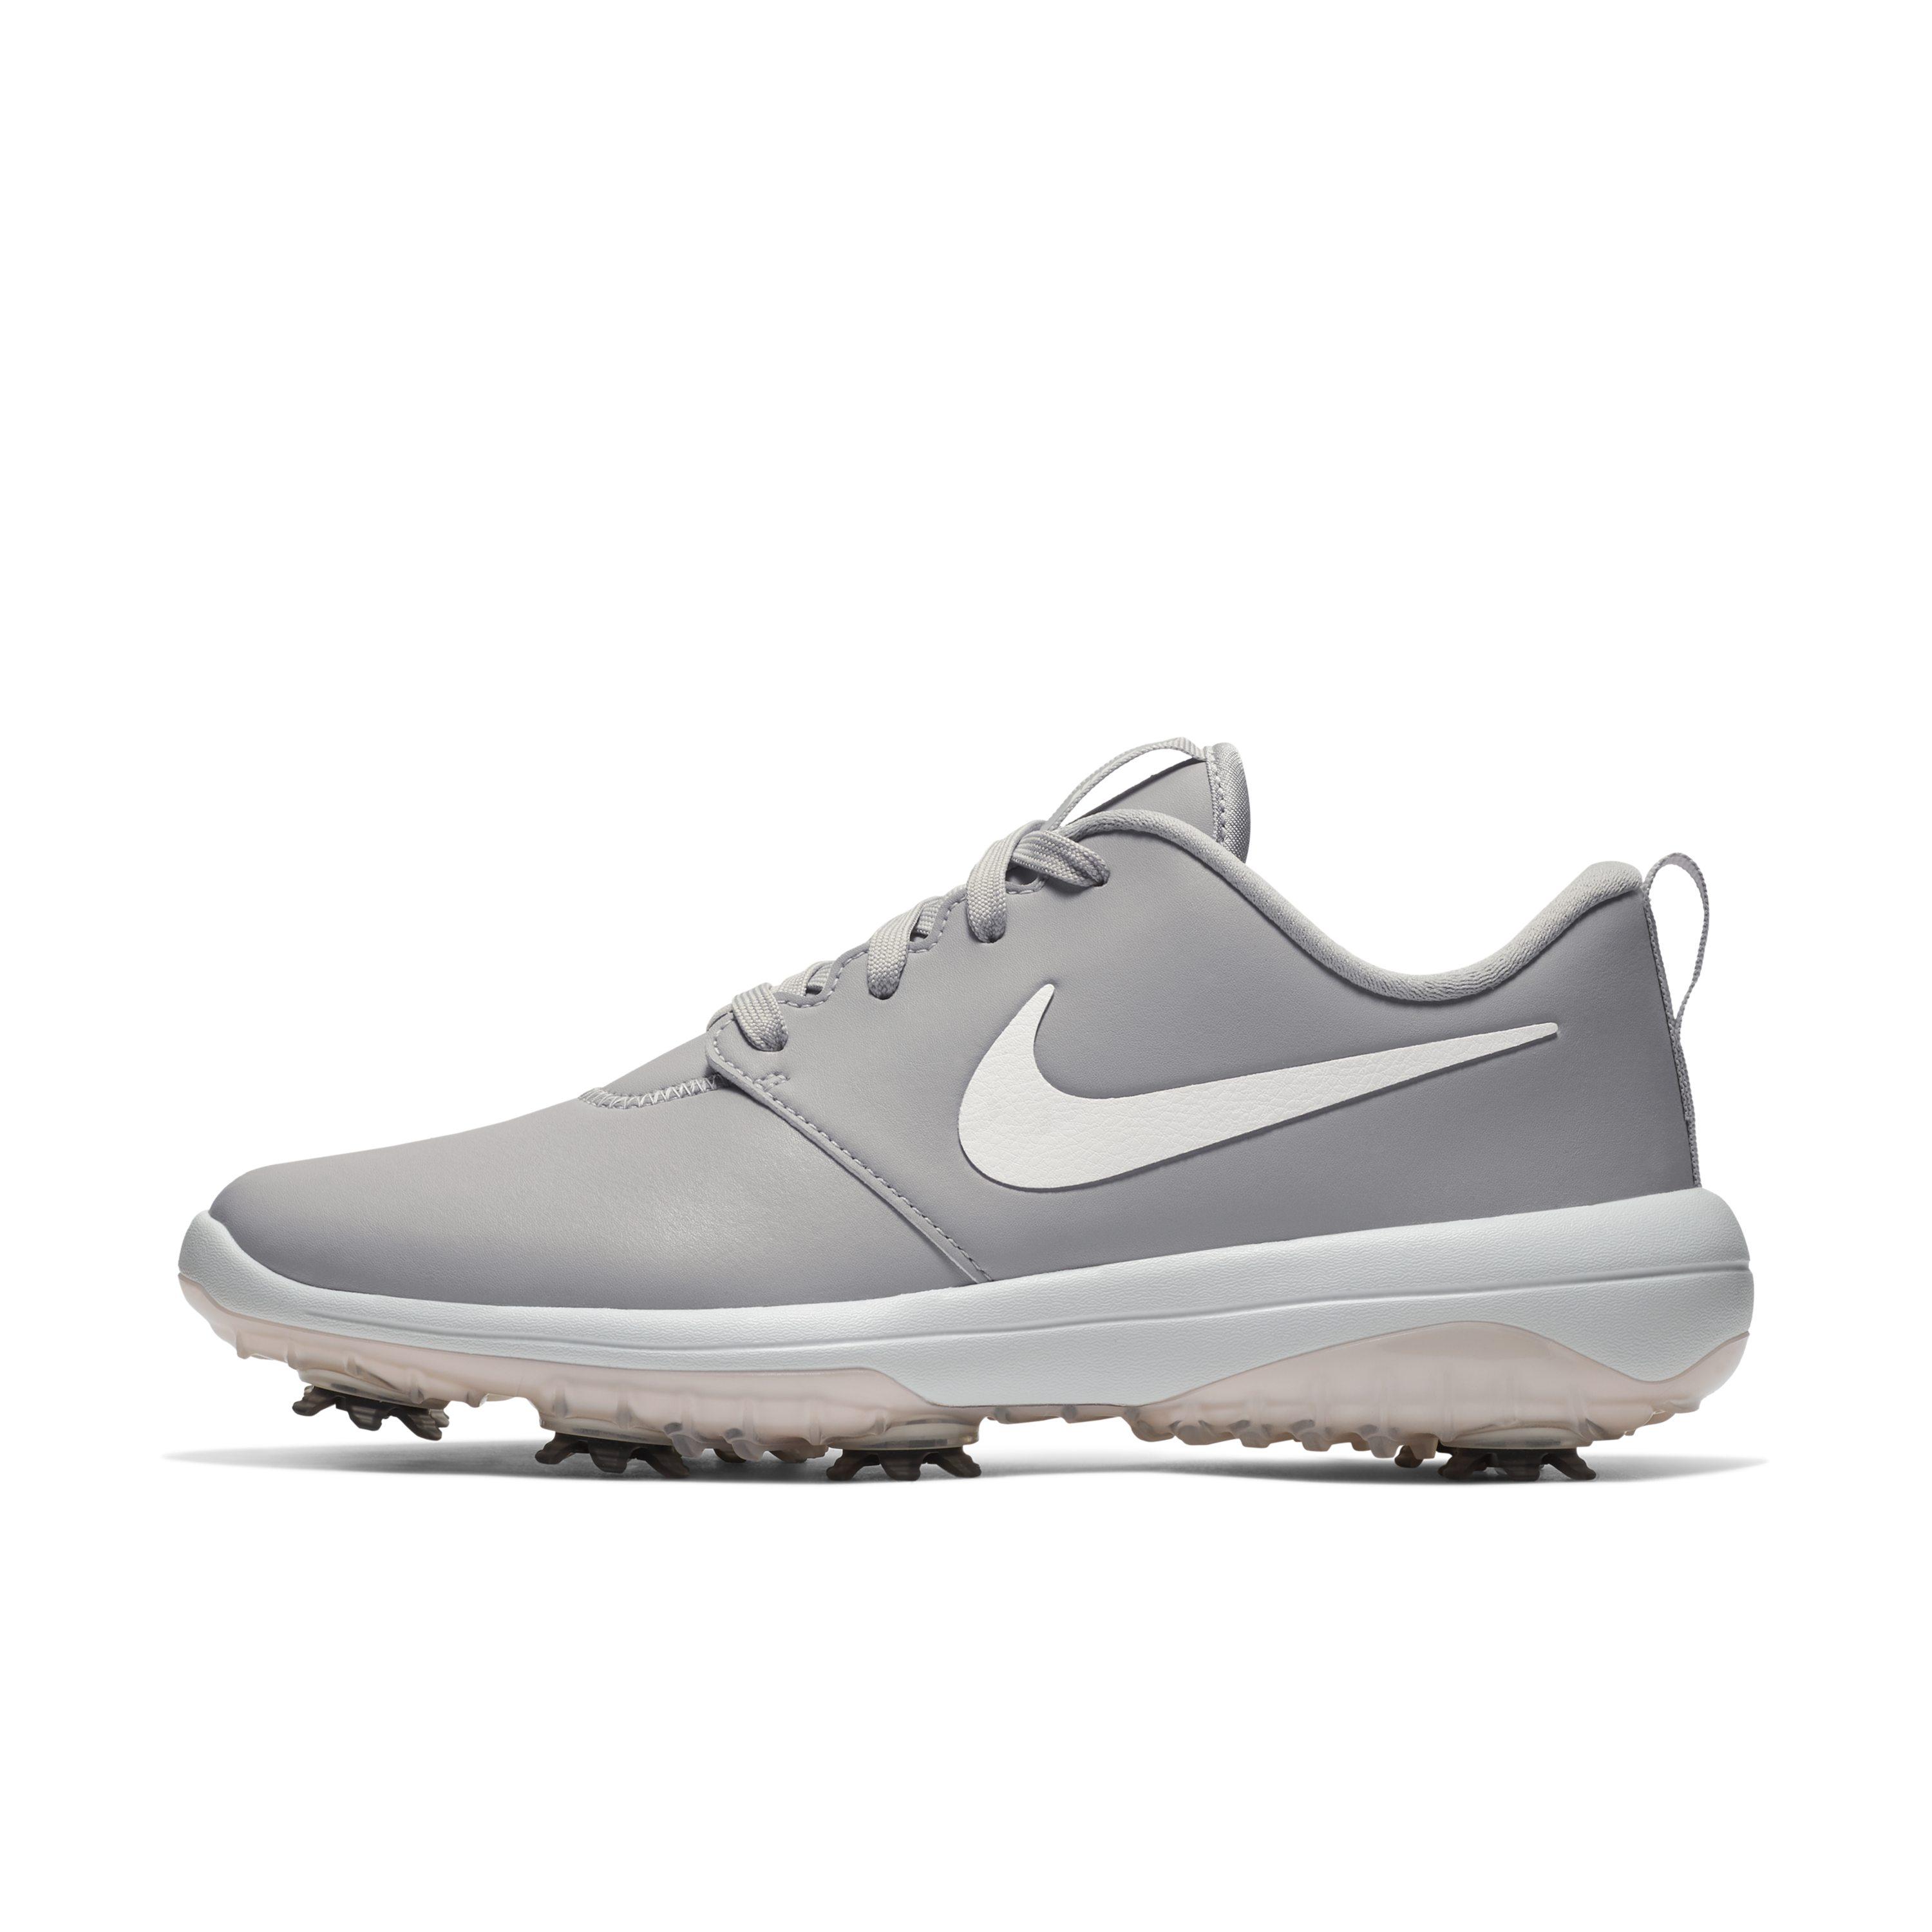 Nike Synthetic Roshe G Tour Golf Shoe in Grey (Grey) - Lyst